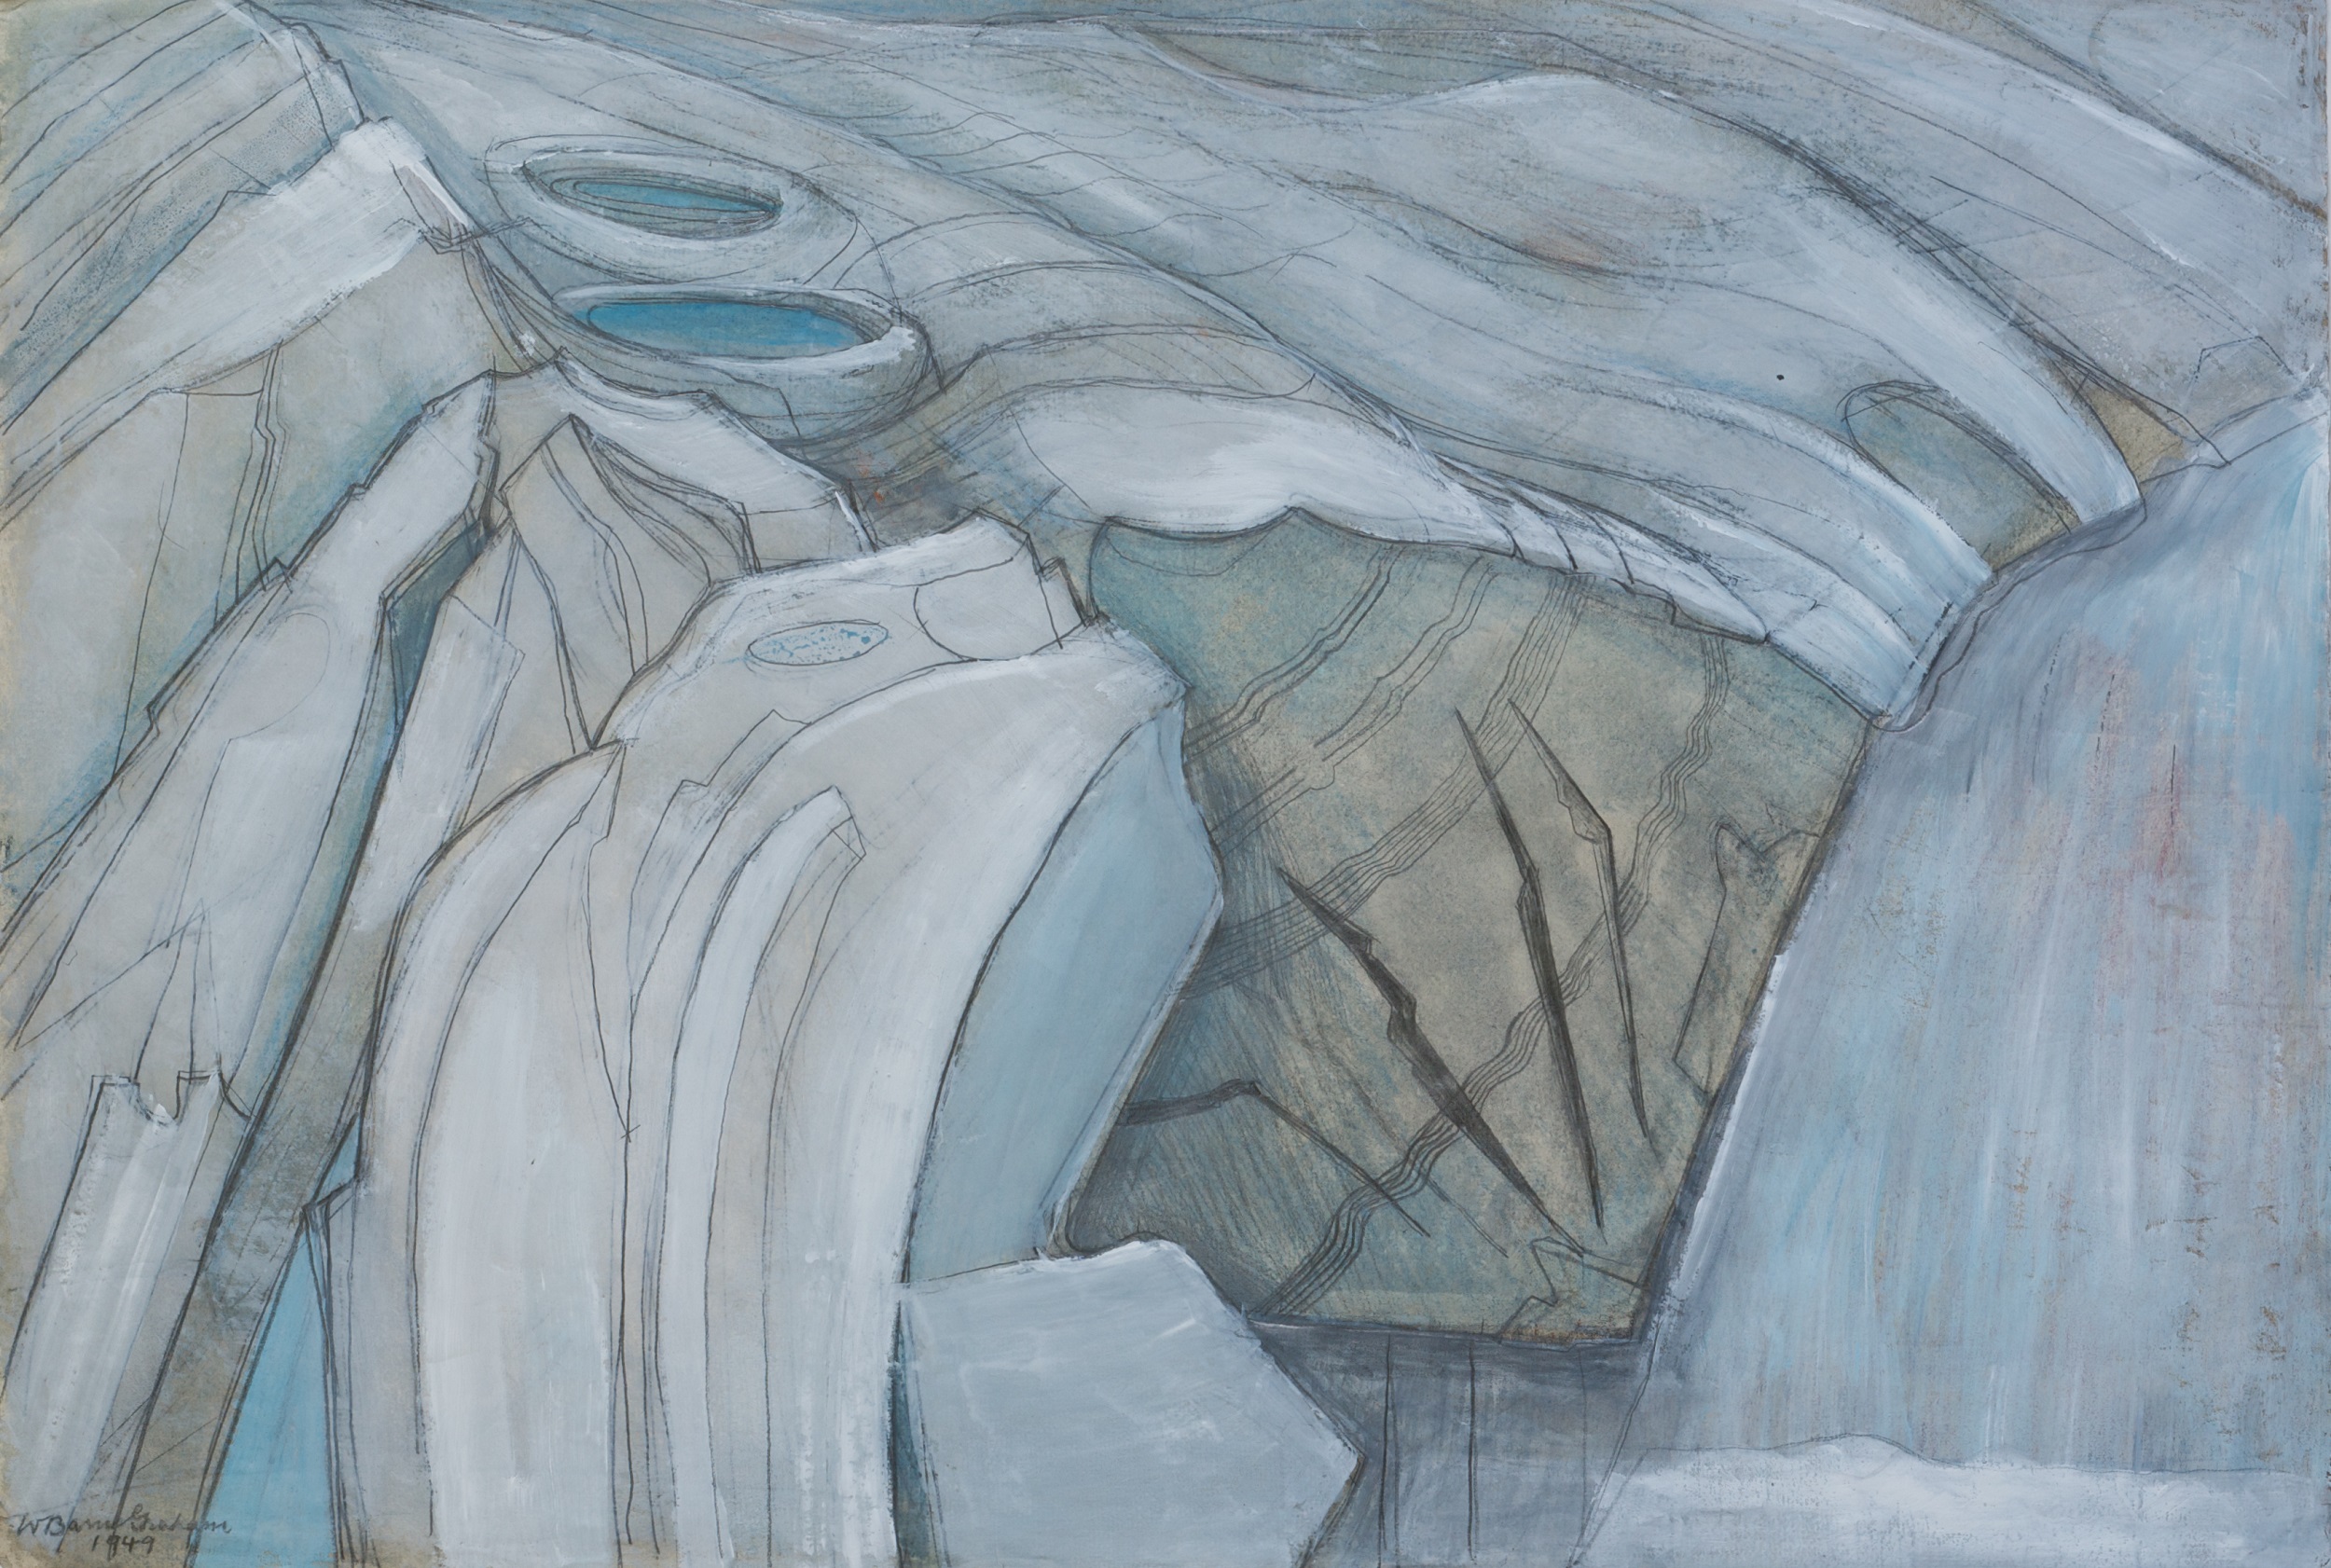 End of the Glacier Upper Grindelwald, c.1950, gouache and pencil on paper. Wilhelmina Barns-Graham Trust